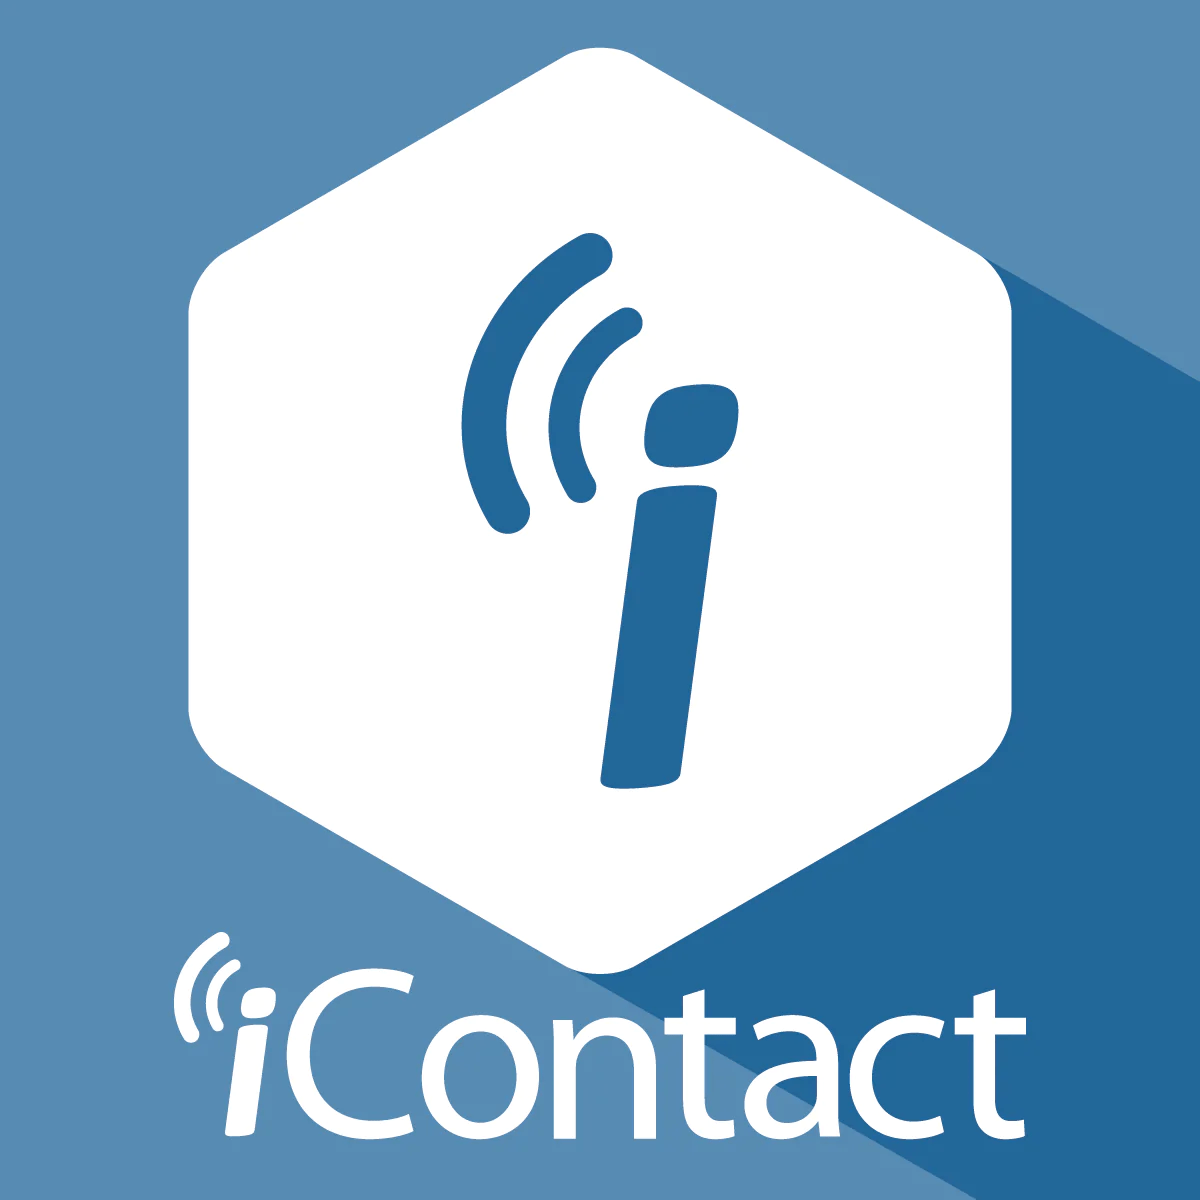 iContact email logo